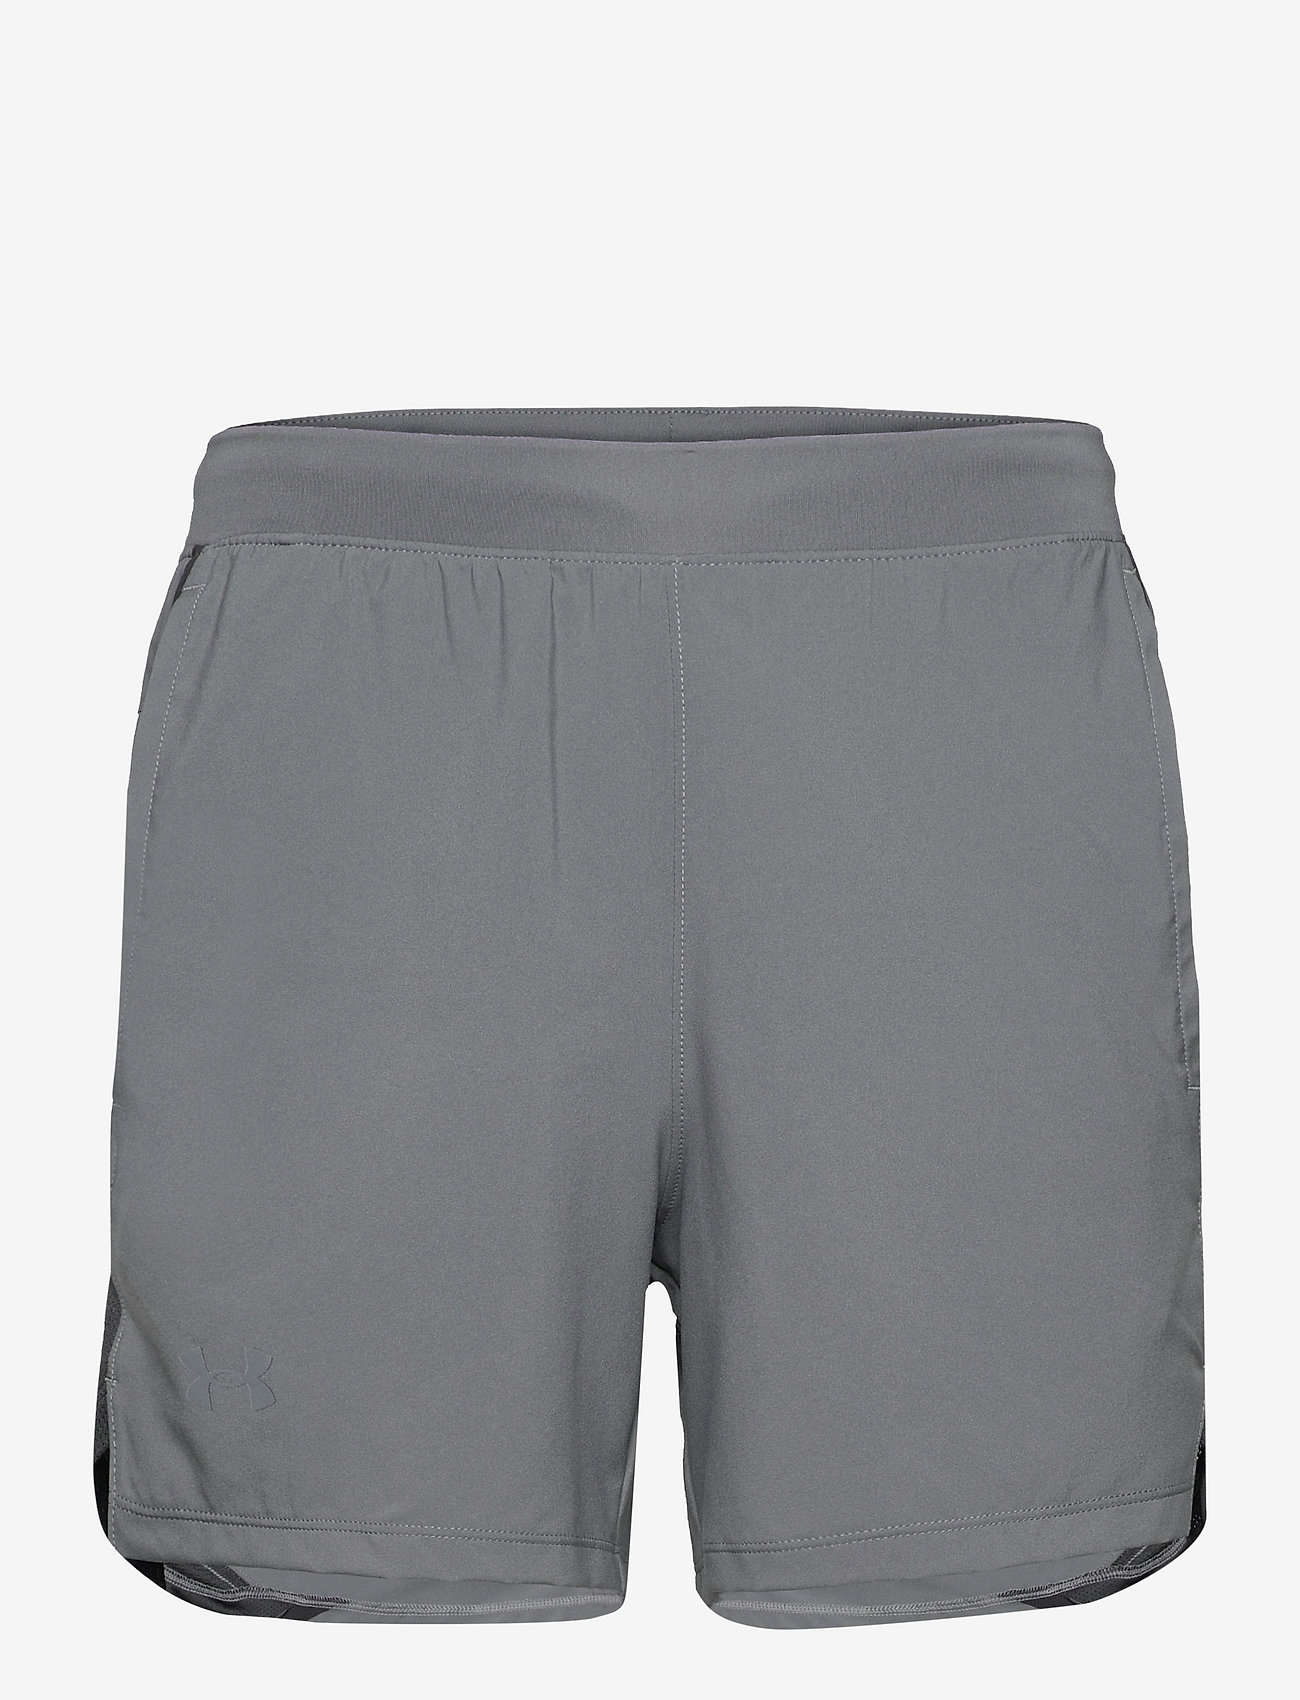 Under Armour - UA LAUNCH 5'' SHORT - träningsshorts - pitch gray - 0